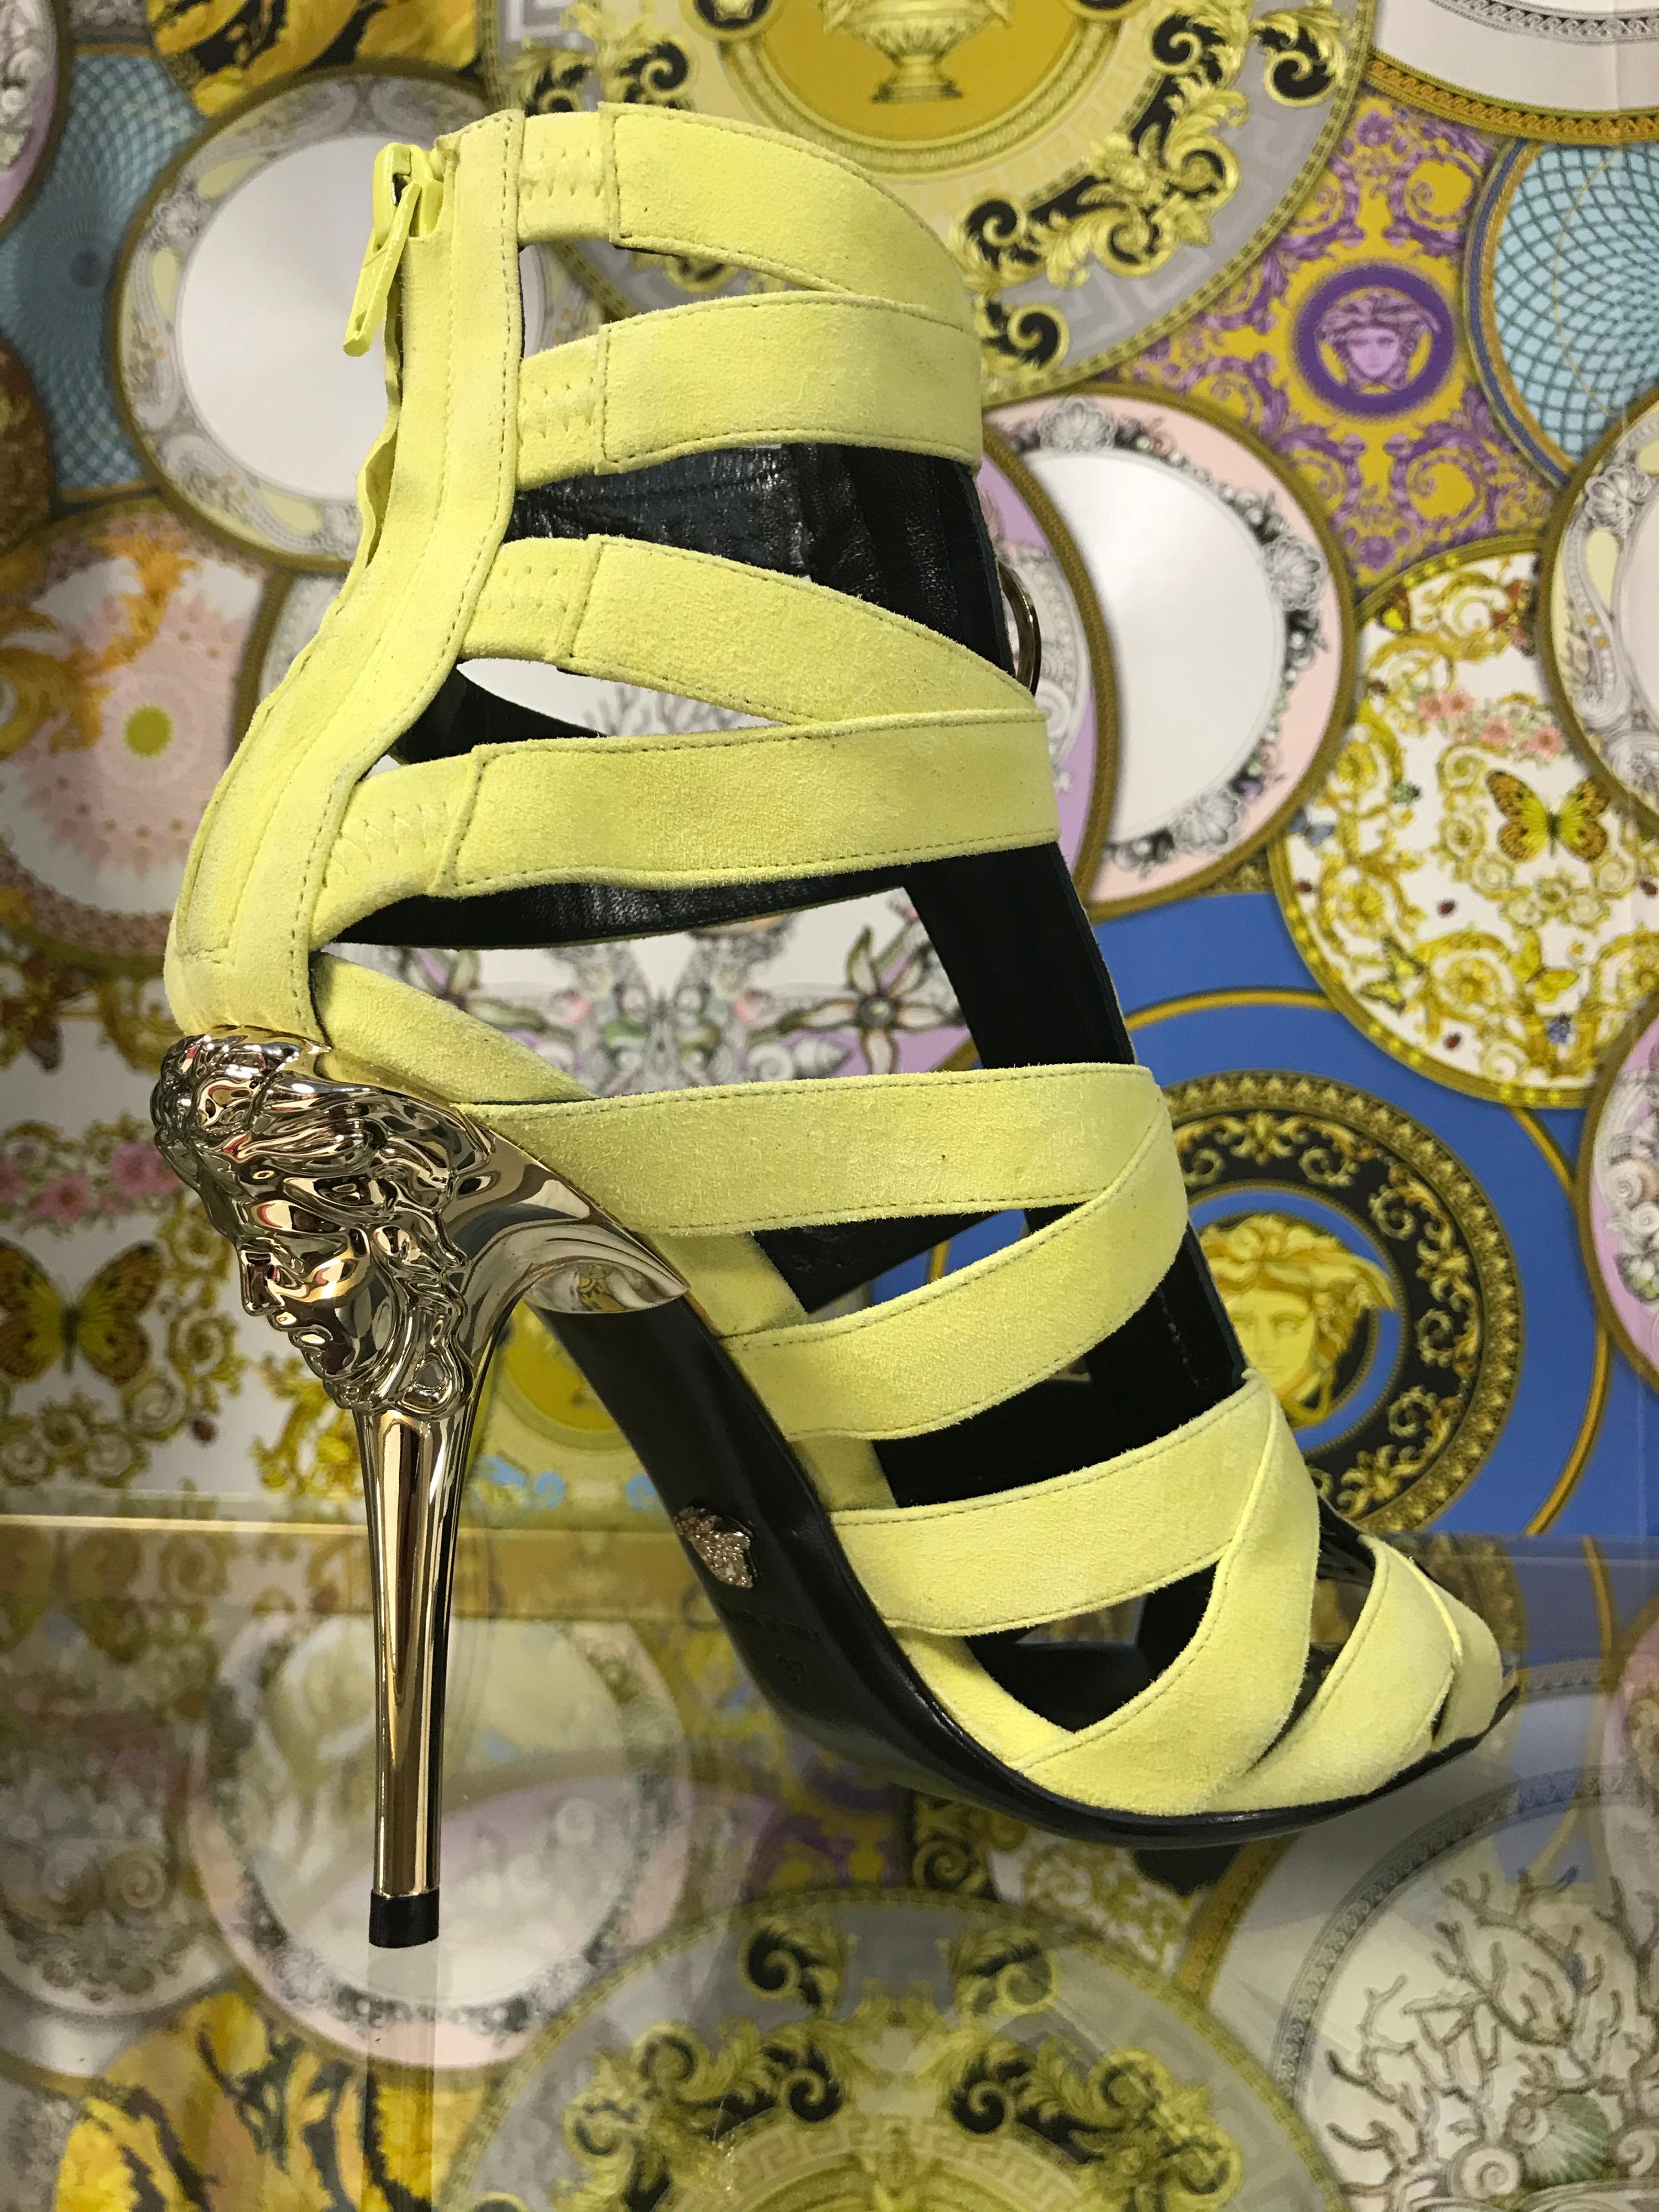 VERSACE GLADIATOR SANDALS

These sandals are a luxurious revival of the legendary gladiator shoes.

Soft yellow suede is trimmed with snakeskin.

Finished with iconic Medusa on the zipper pull and the heel.

IT Size: 37 - US 7

Made in Italy

New
